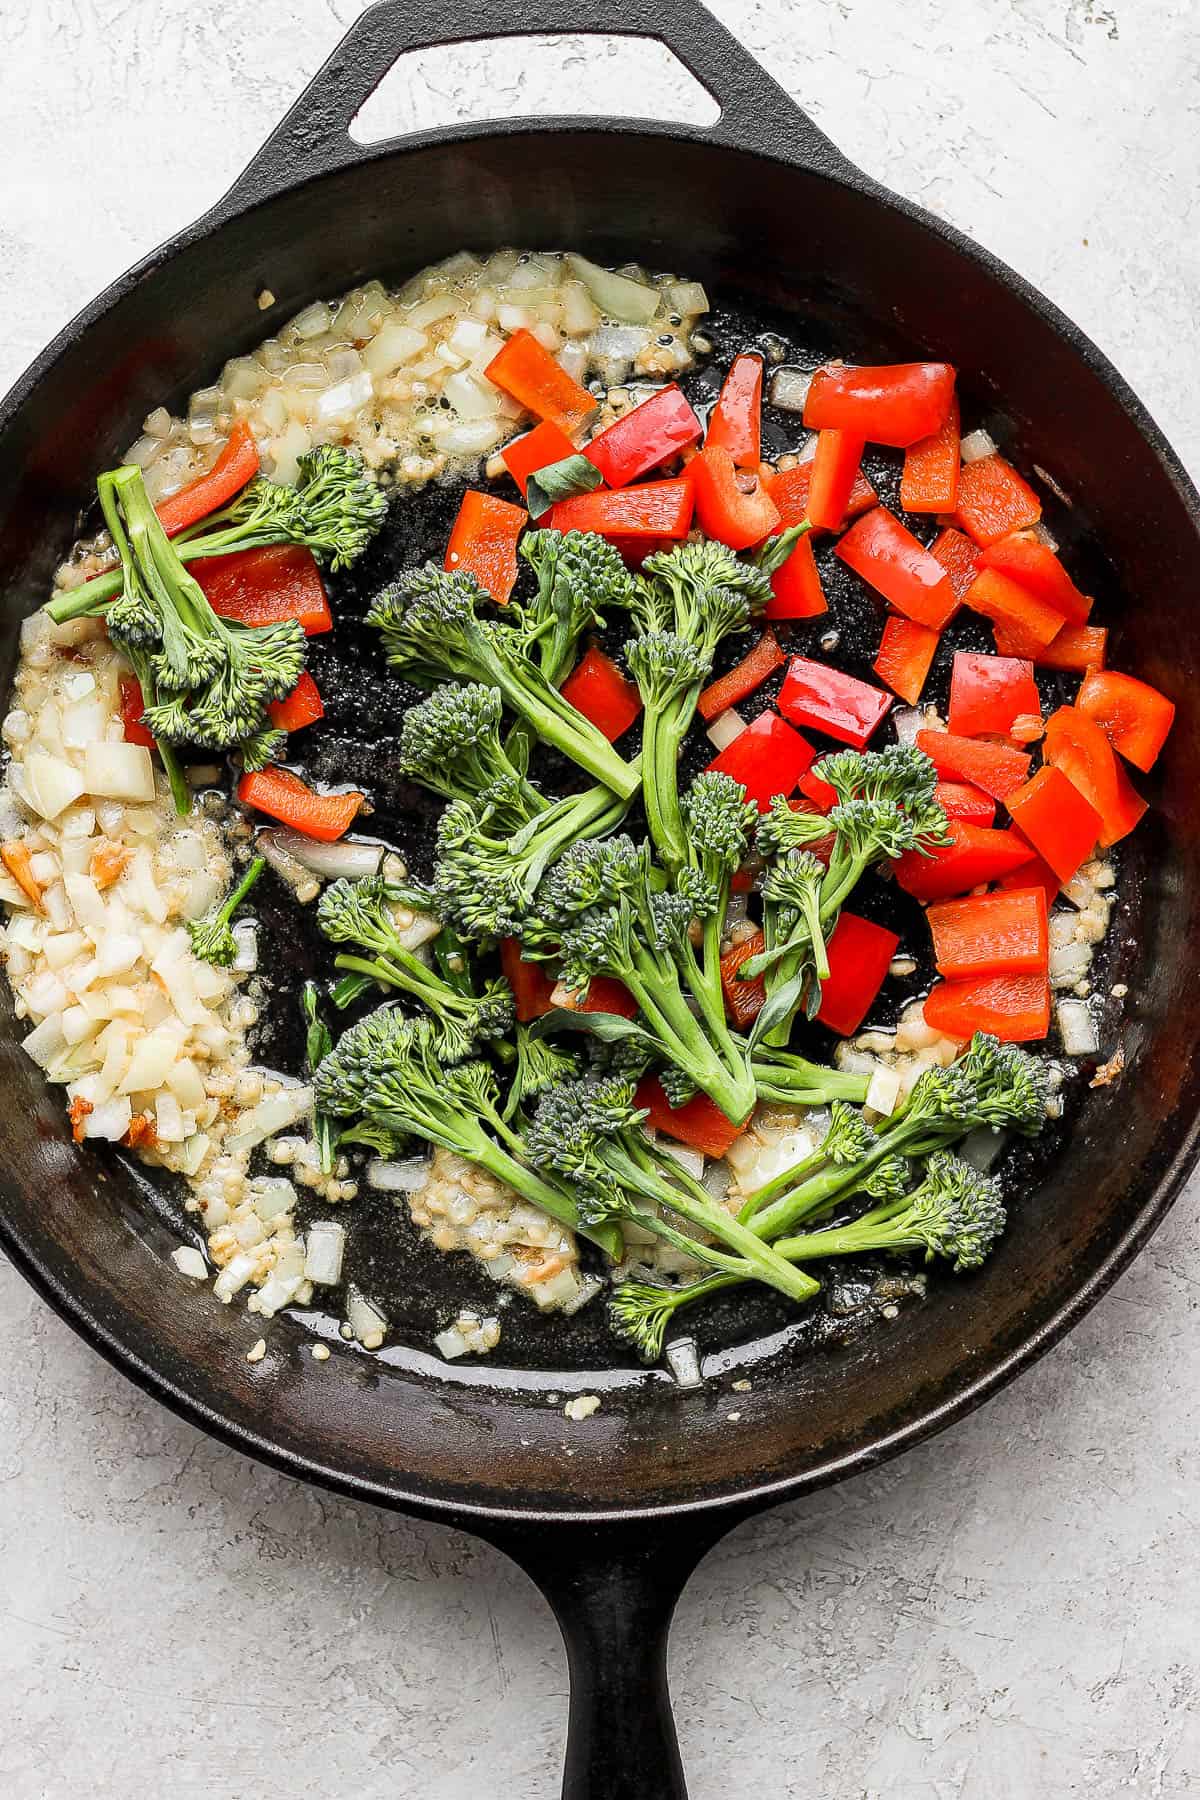 Broccoli and chopped red bell pepper added to the cast iron skillet.